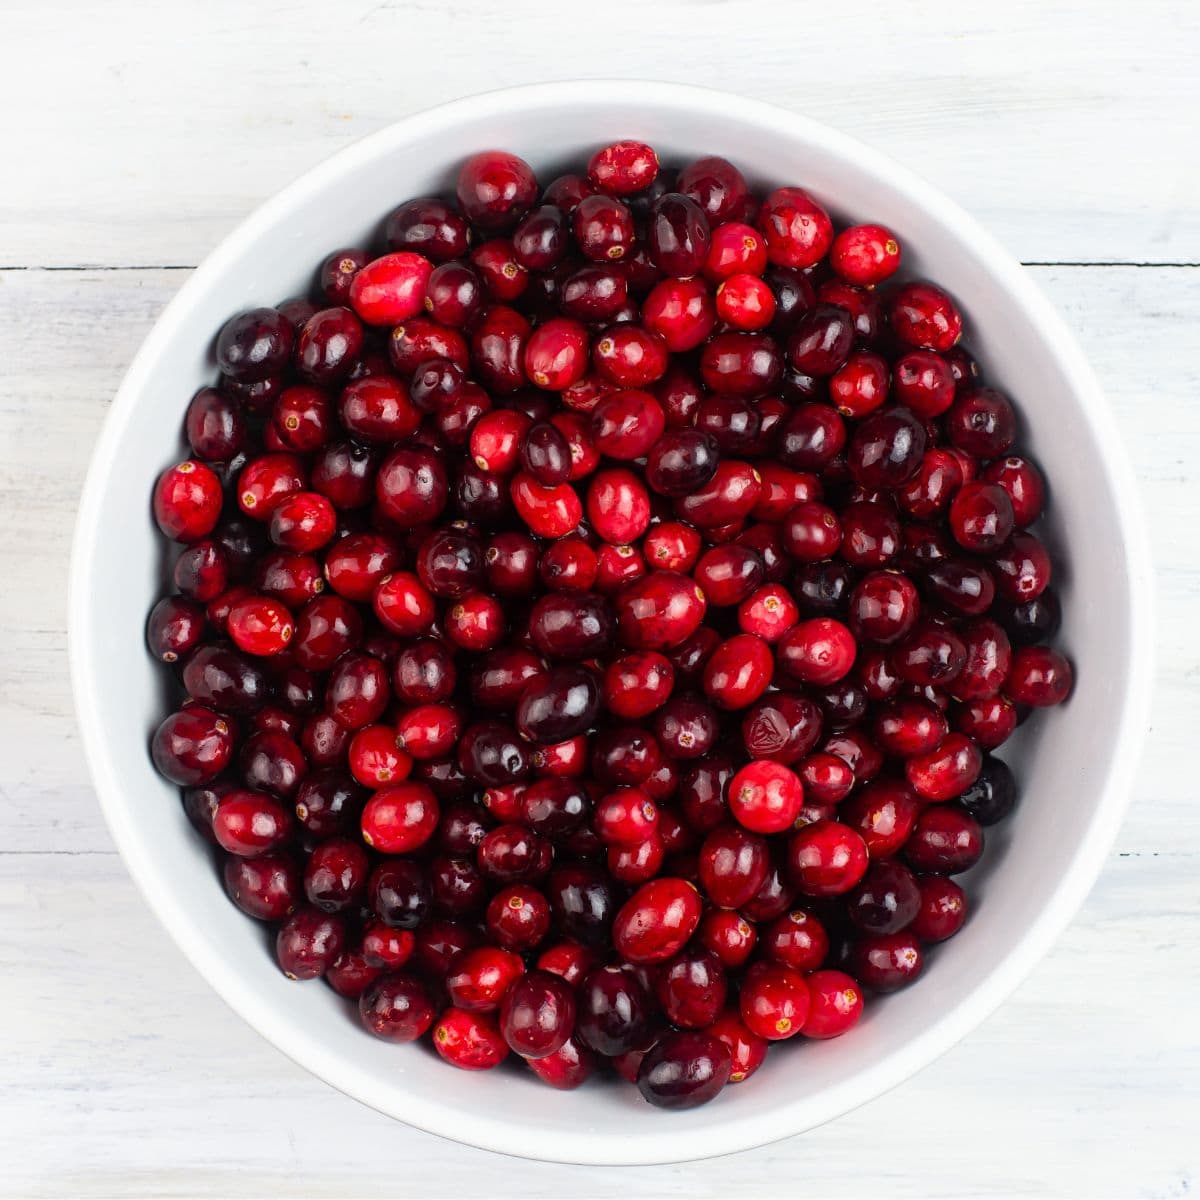 A white glass bowl filled with fresh cranberries.